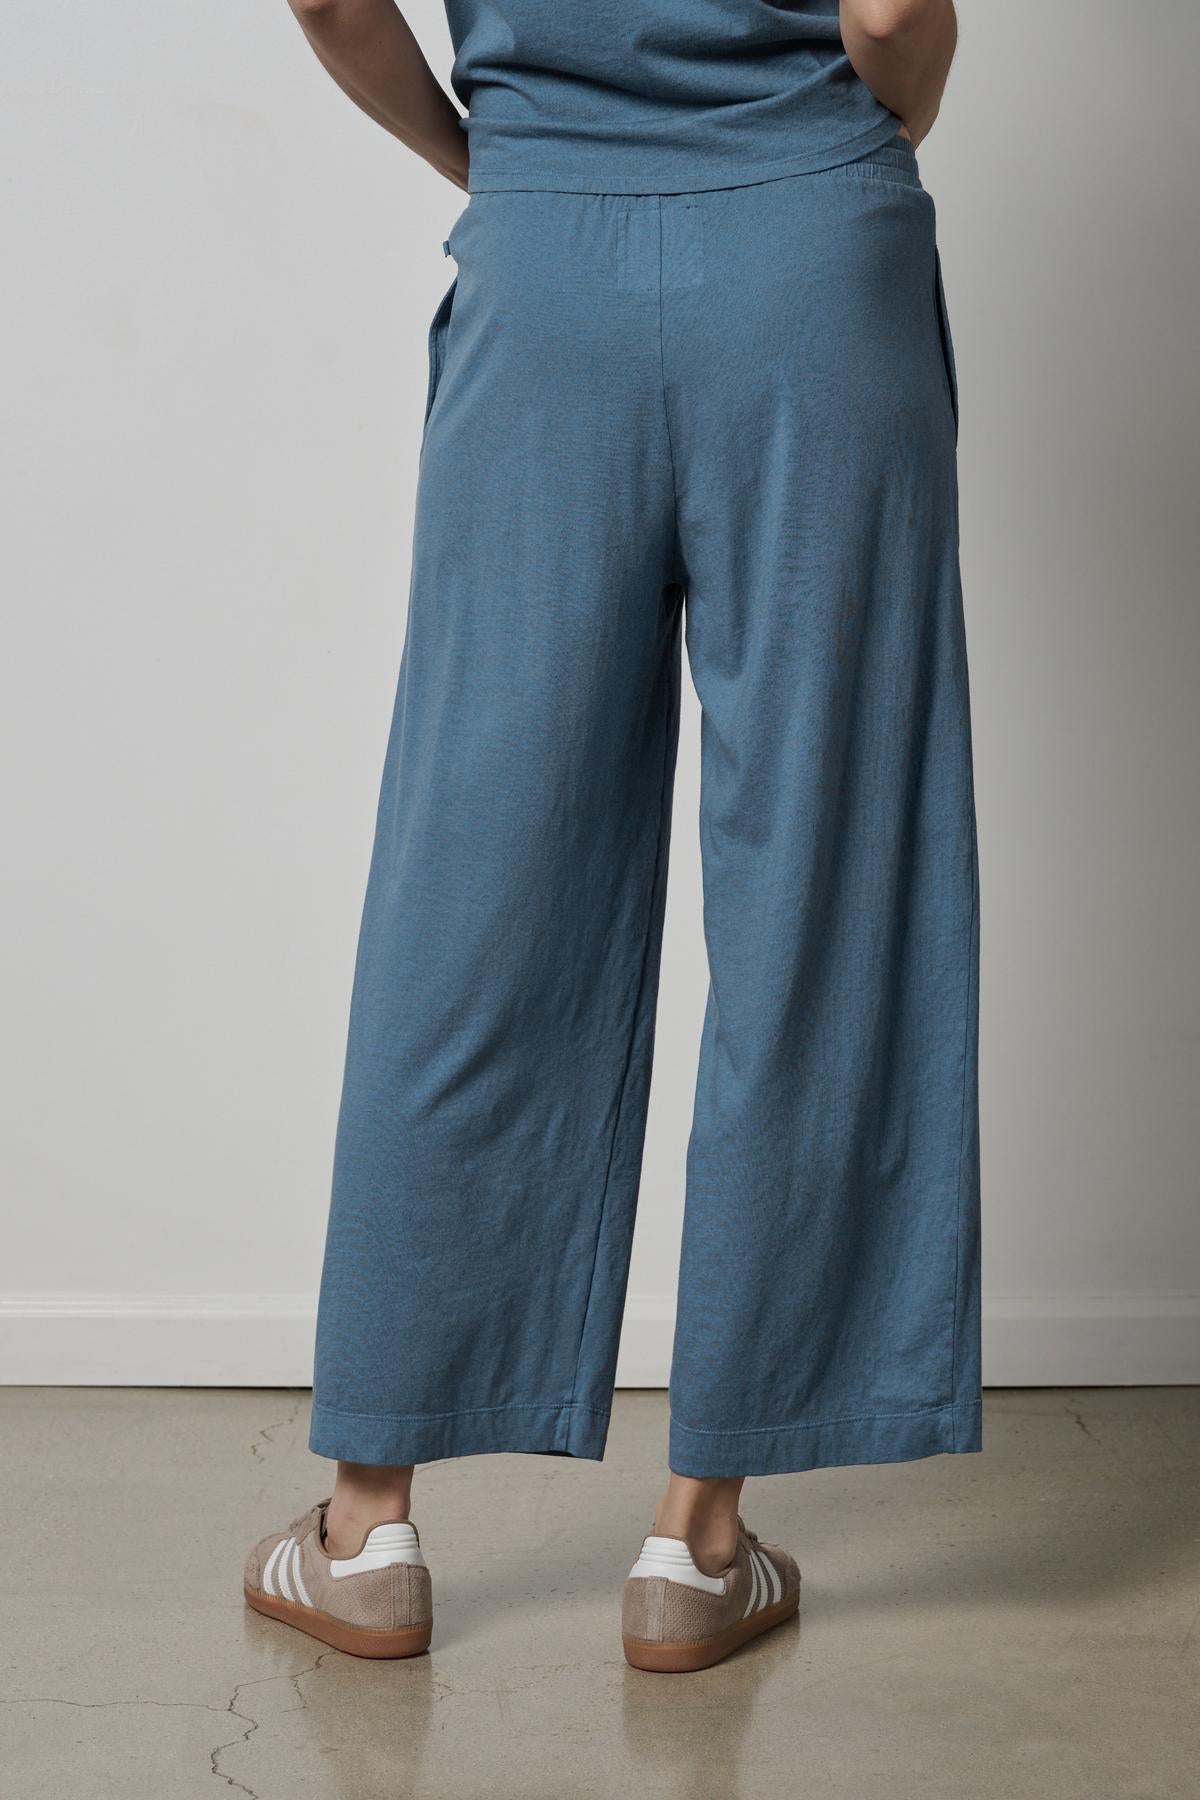 The back view of a woman wearing Velvet by Jenny Graham's PISMO PANT, a pair of blue wide leg pants with elastic waist and slash pockets.-35496003928257